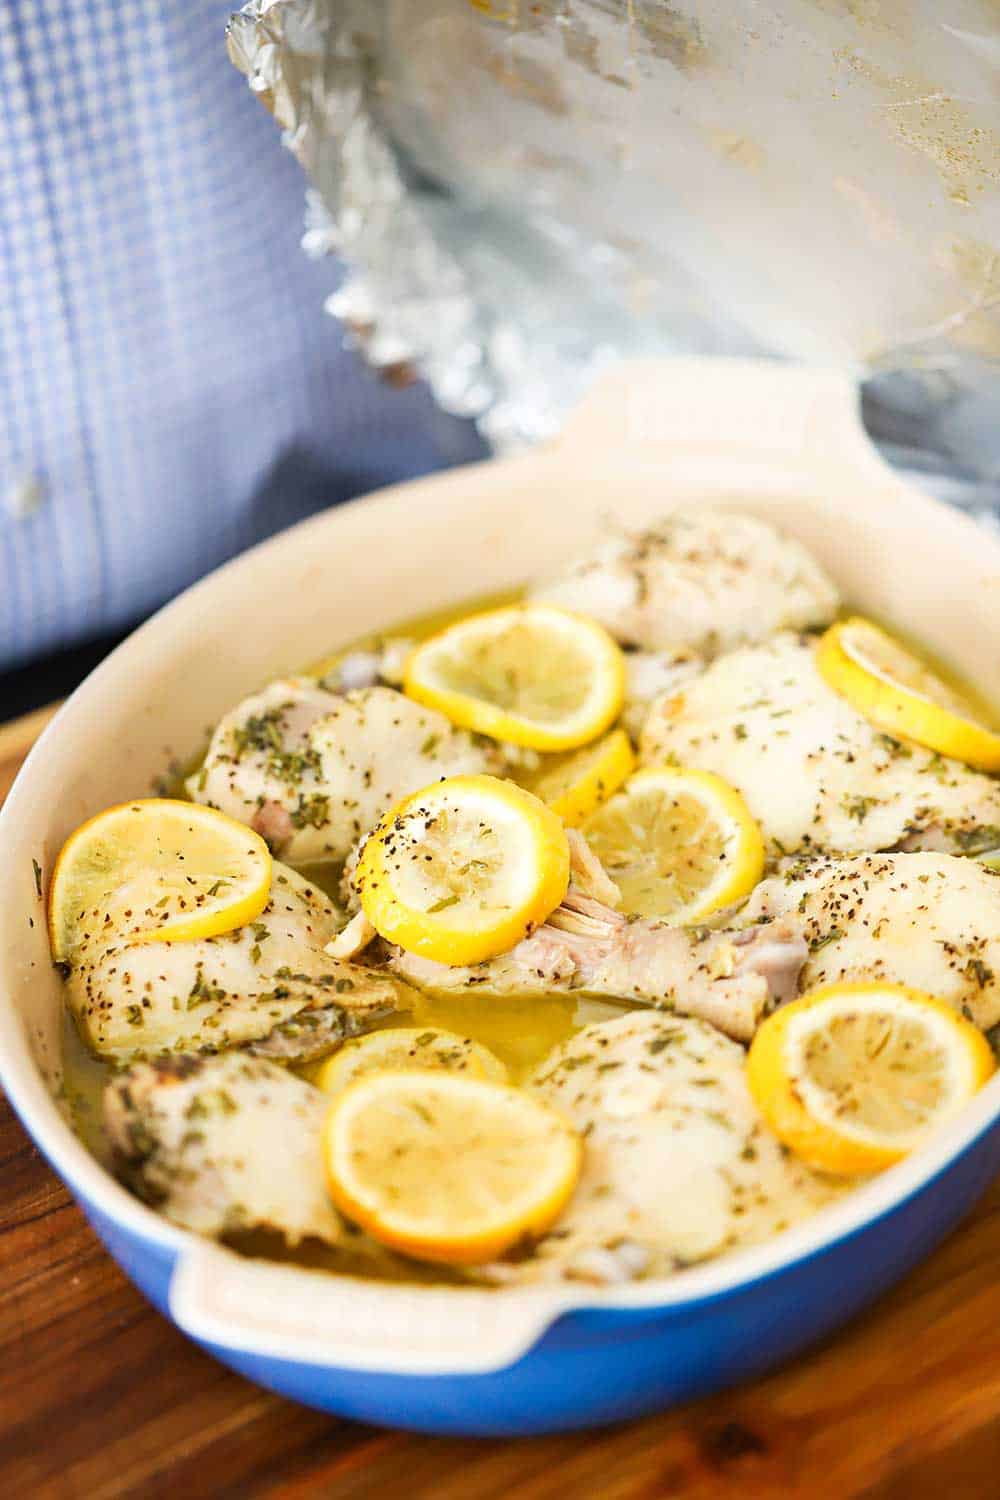 A person removing a piece of foil off a a baking dish filled with cooked chicken with sliced lemons, white wine, and herbs.